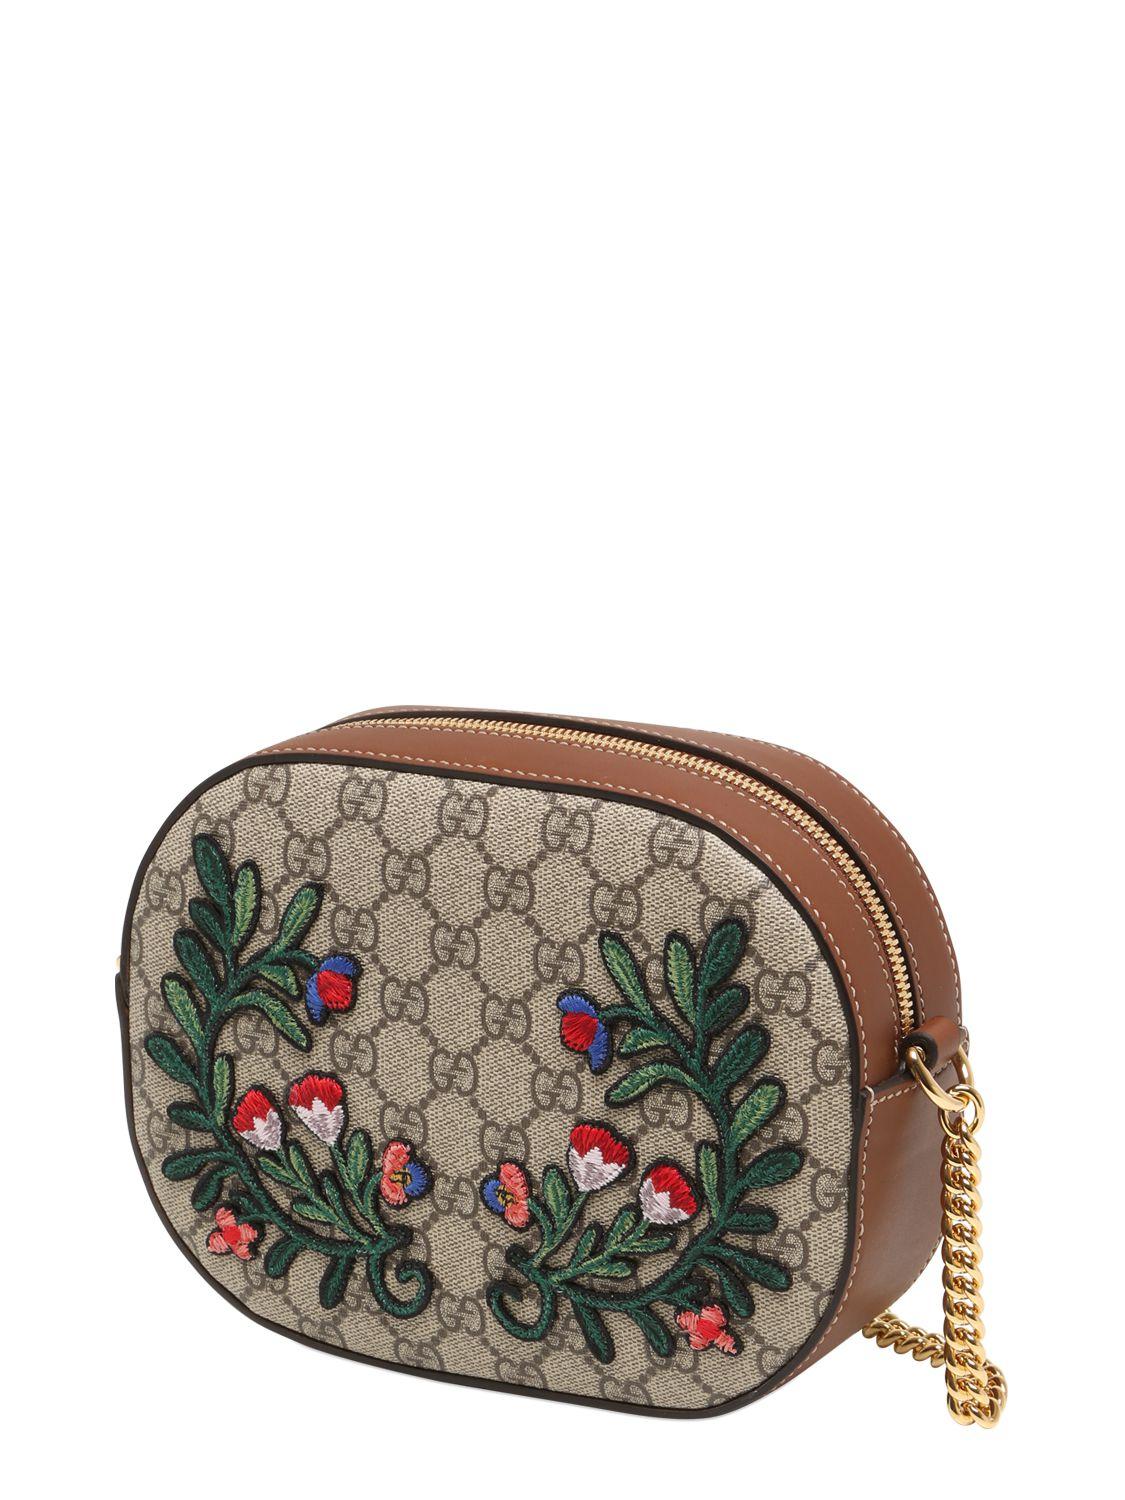 Gucci Flower Patches Gg Supreme Camera Bag | Lyst